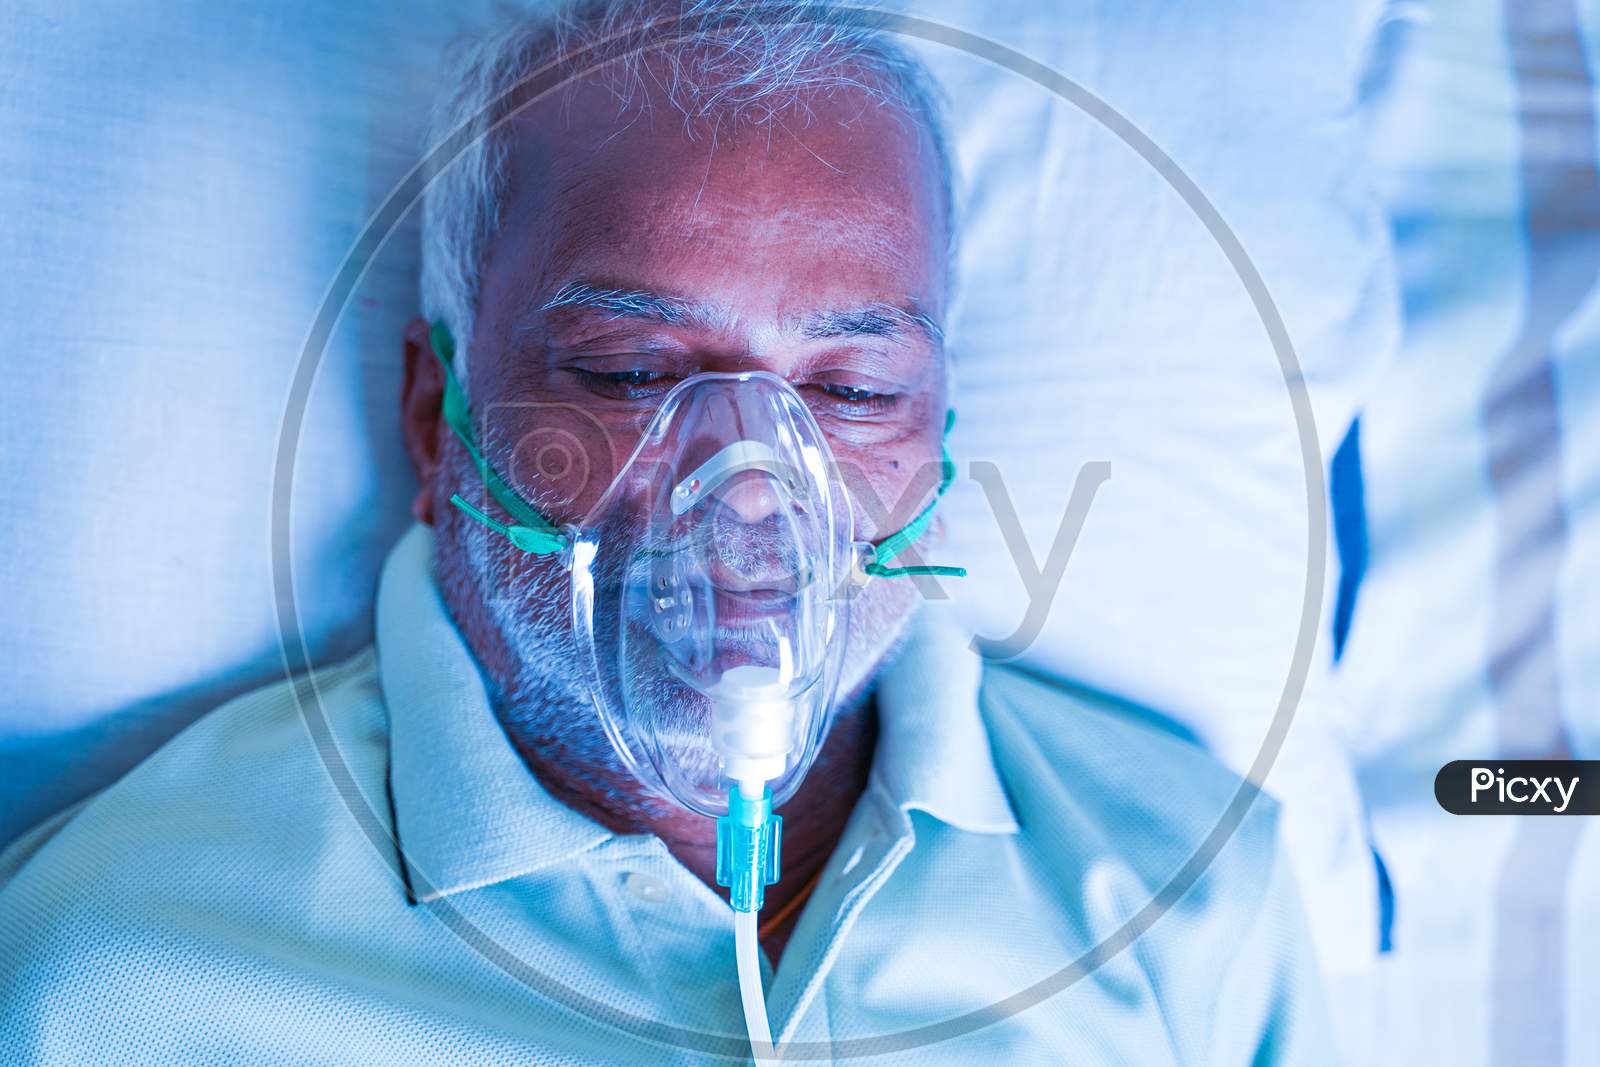 Close Up Top View Head Shot Of Old Breathing With Ventilator Oxygen Mask At Hospital Due To Coronavirus Covid-19 Breath Shortness Or Dyspnea